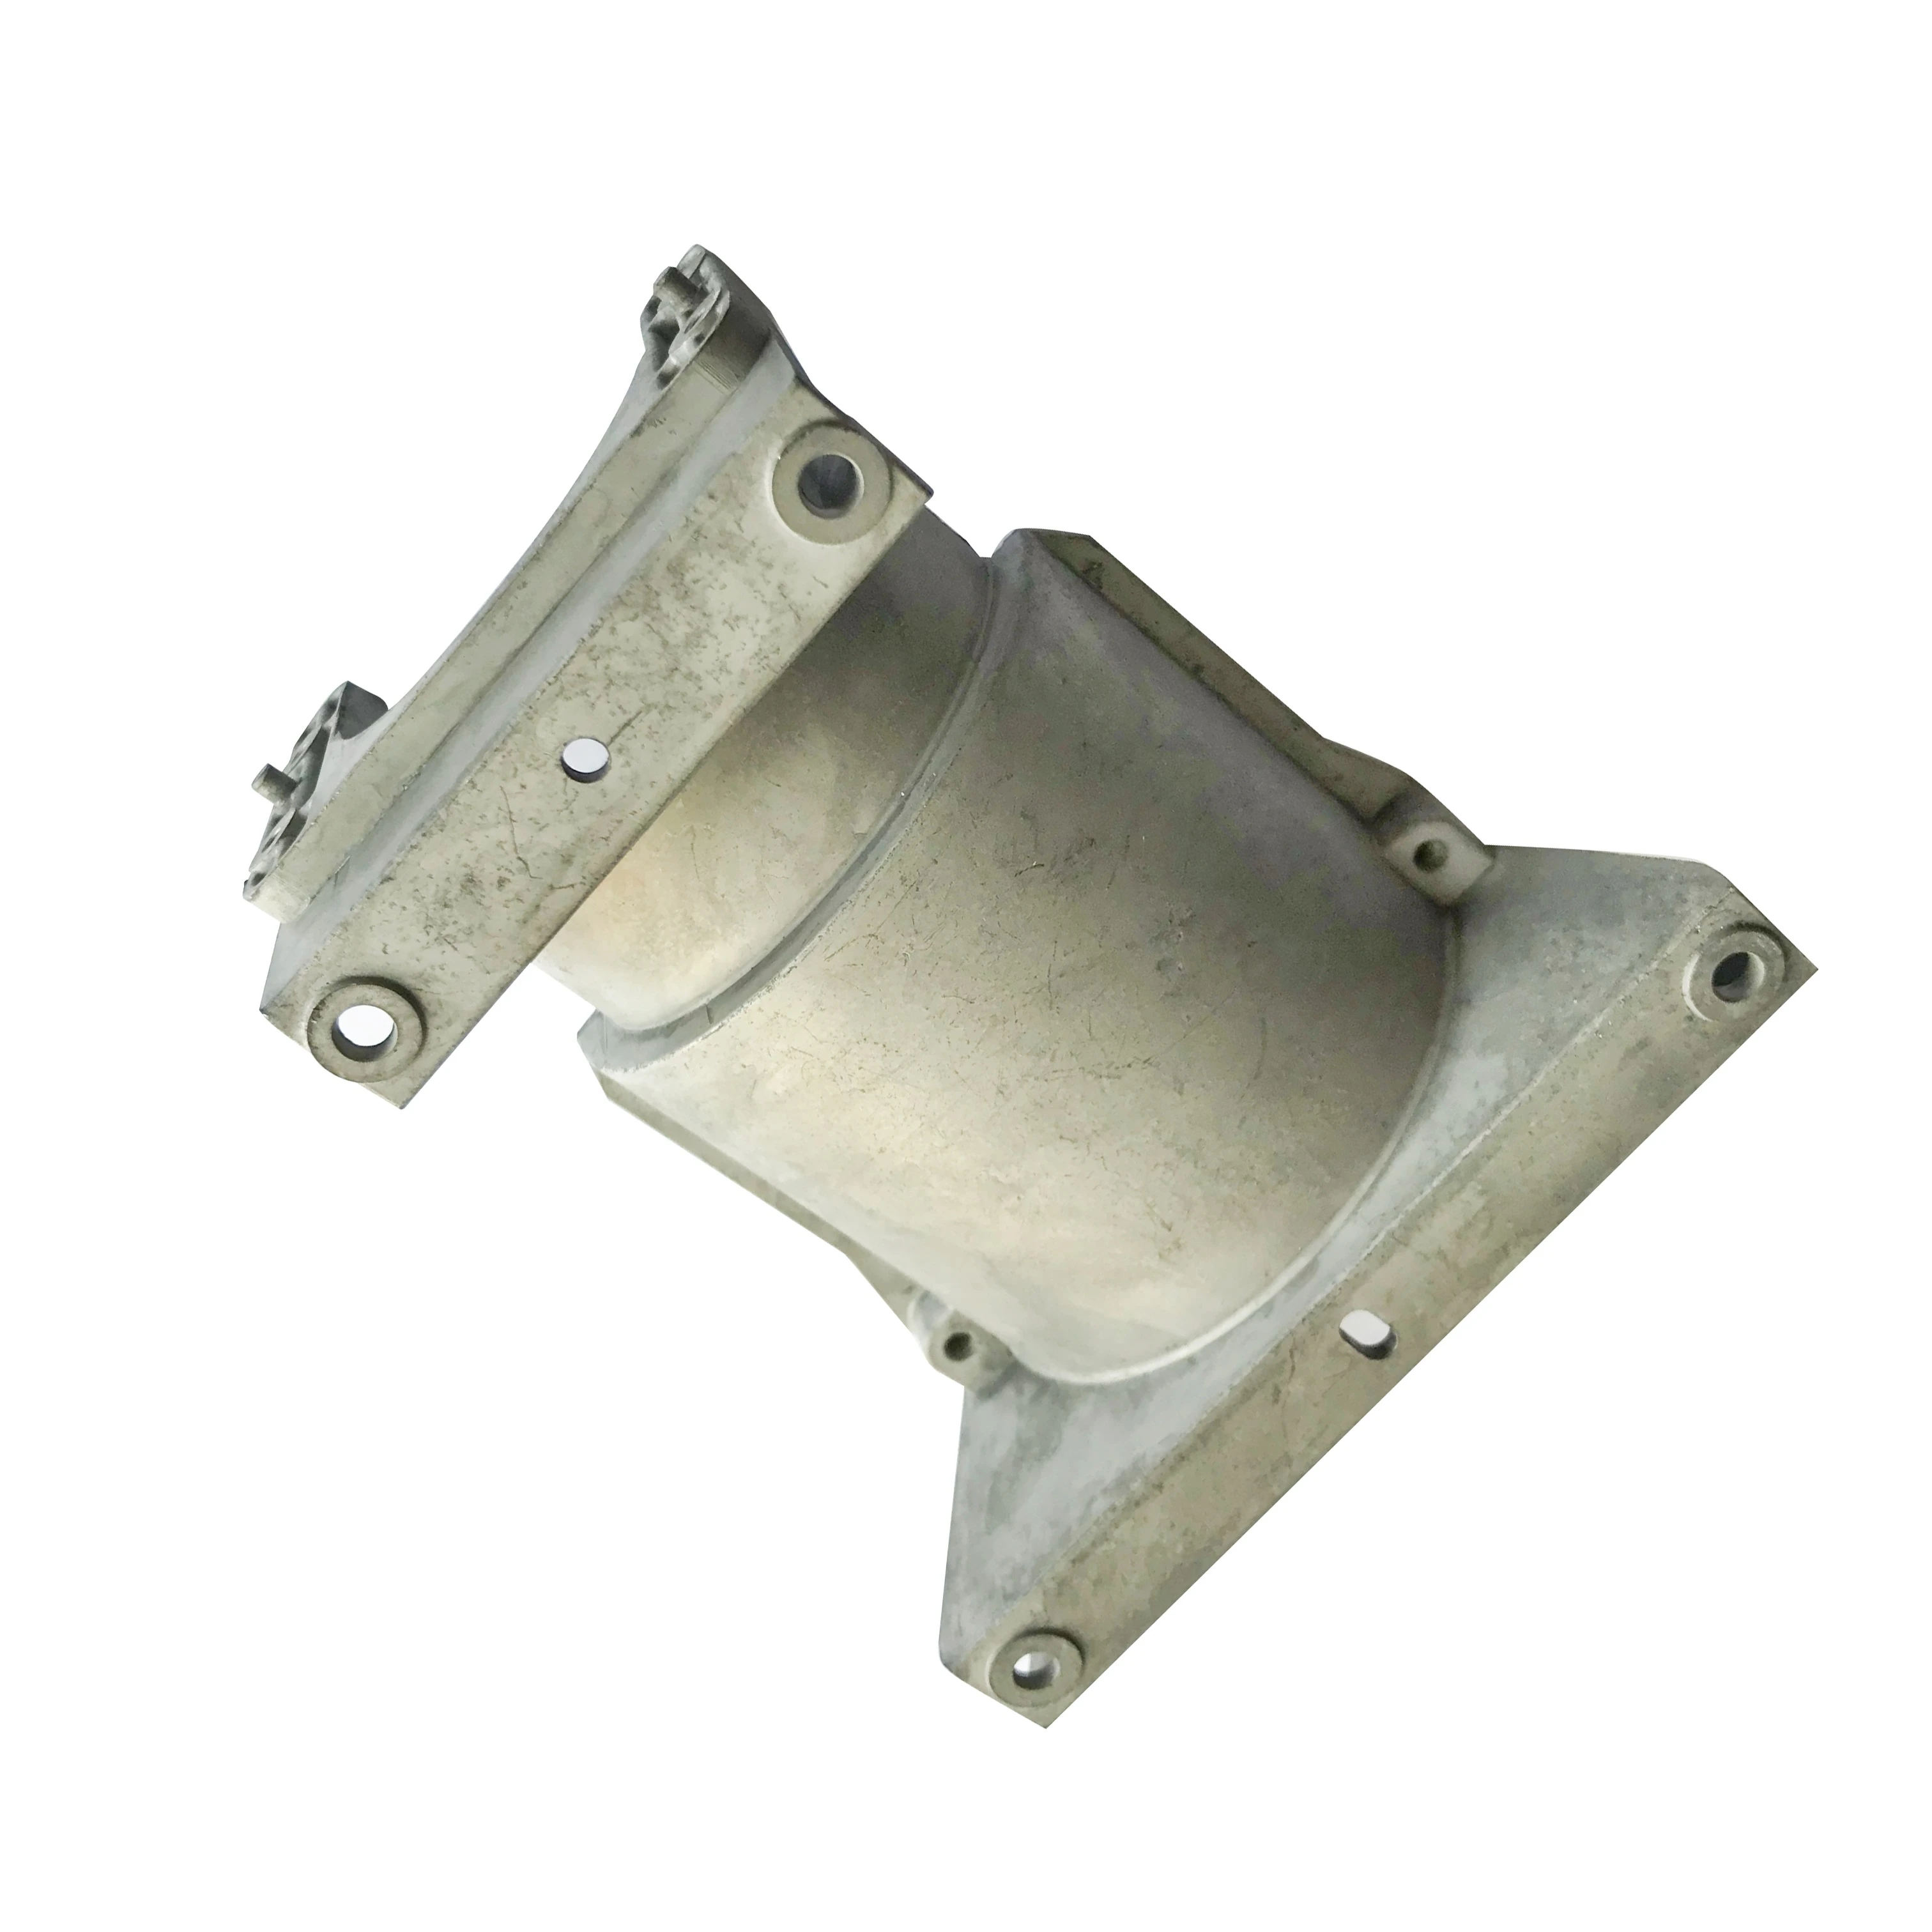 Magnesium Die-casting Of The Inner Shell Of The Projector, Optical Instrument Accessories